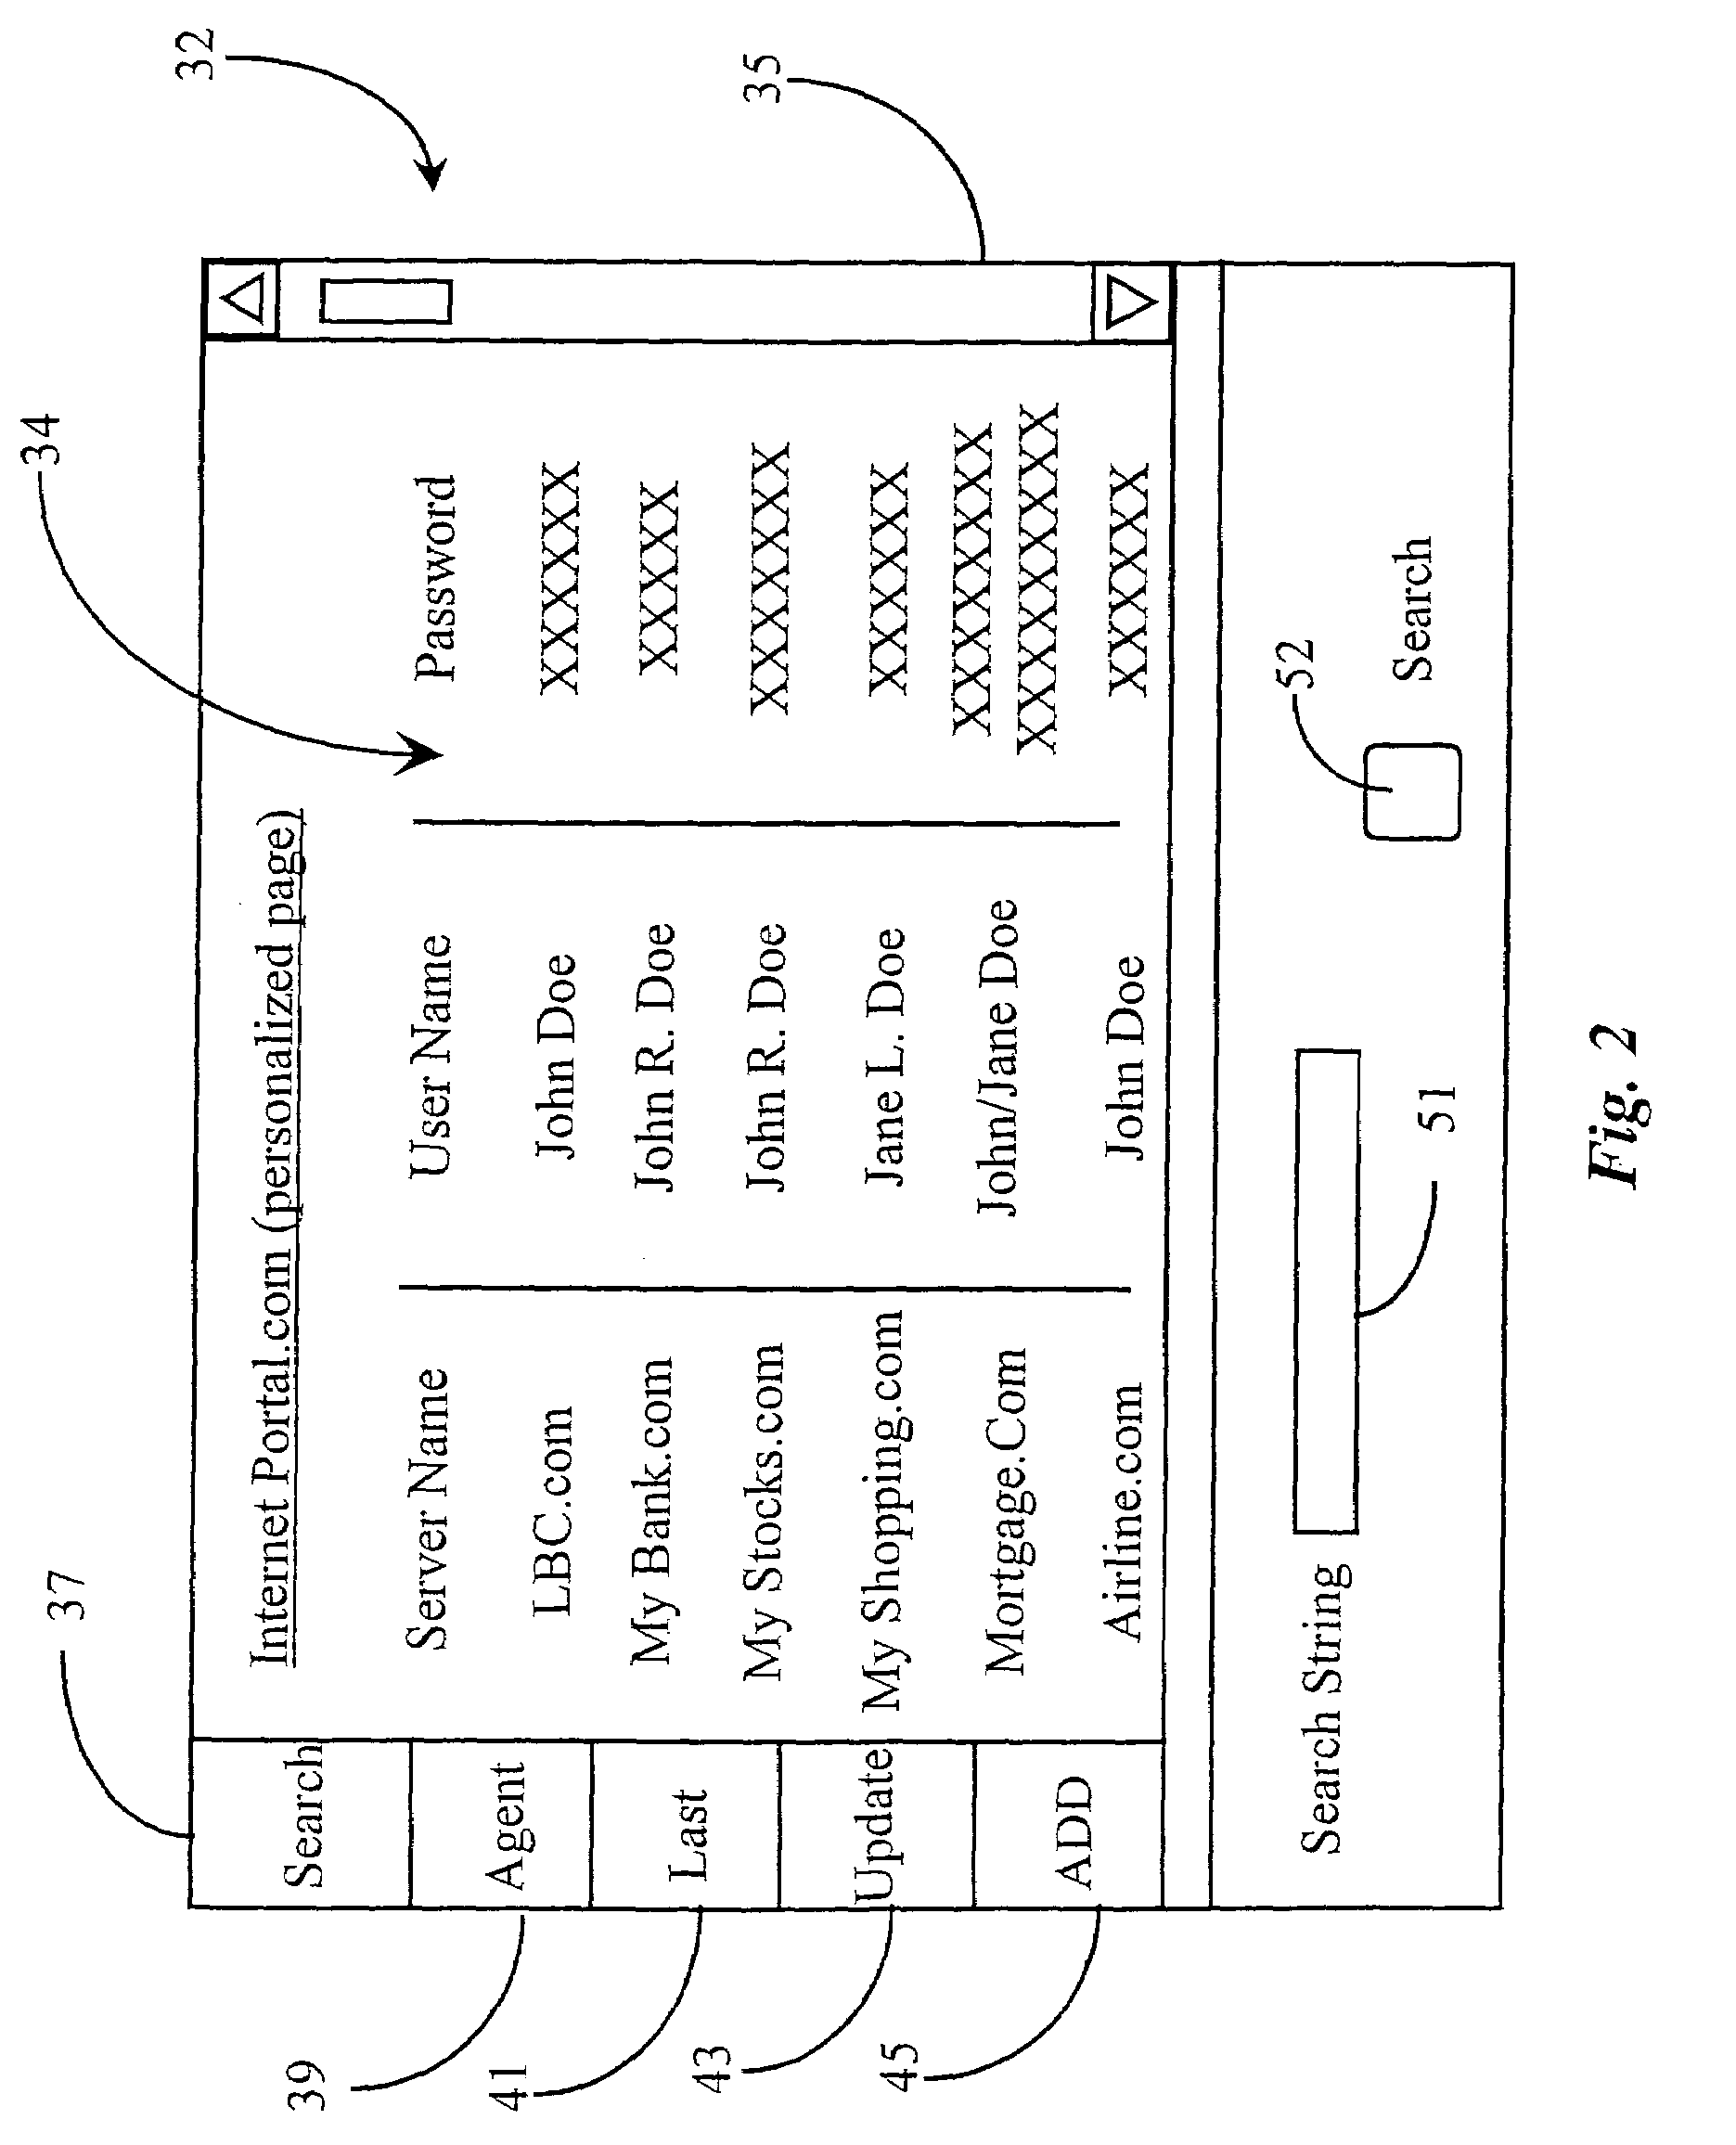 Method and apparatus for providing calculated and solution-oriented personalized summary-reports to a user through a single user-interface